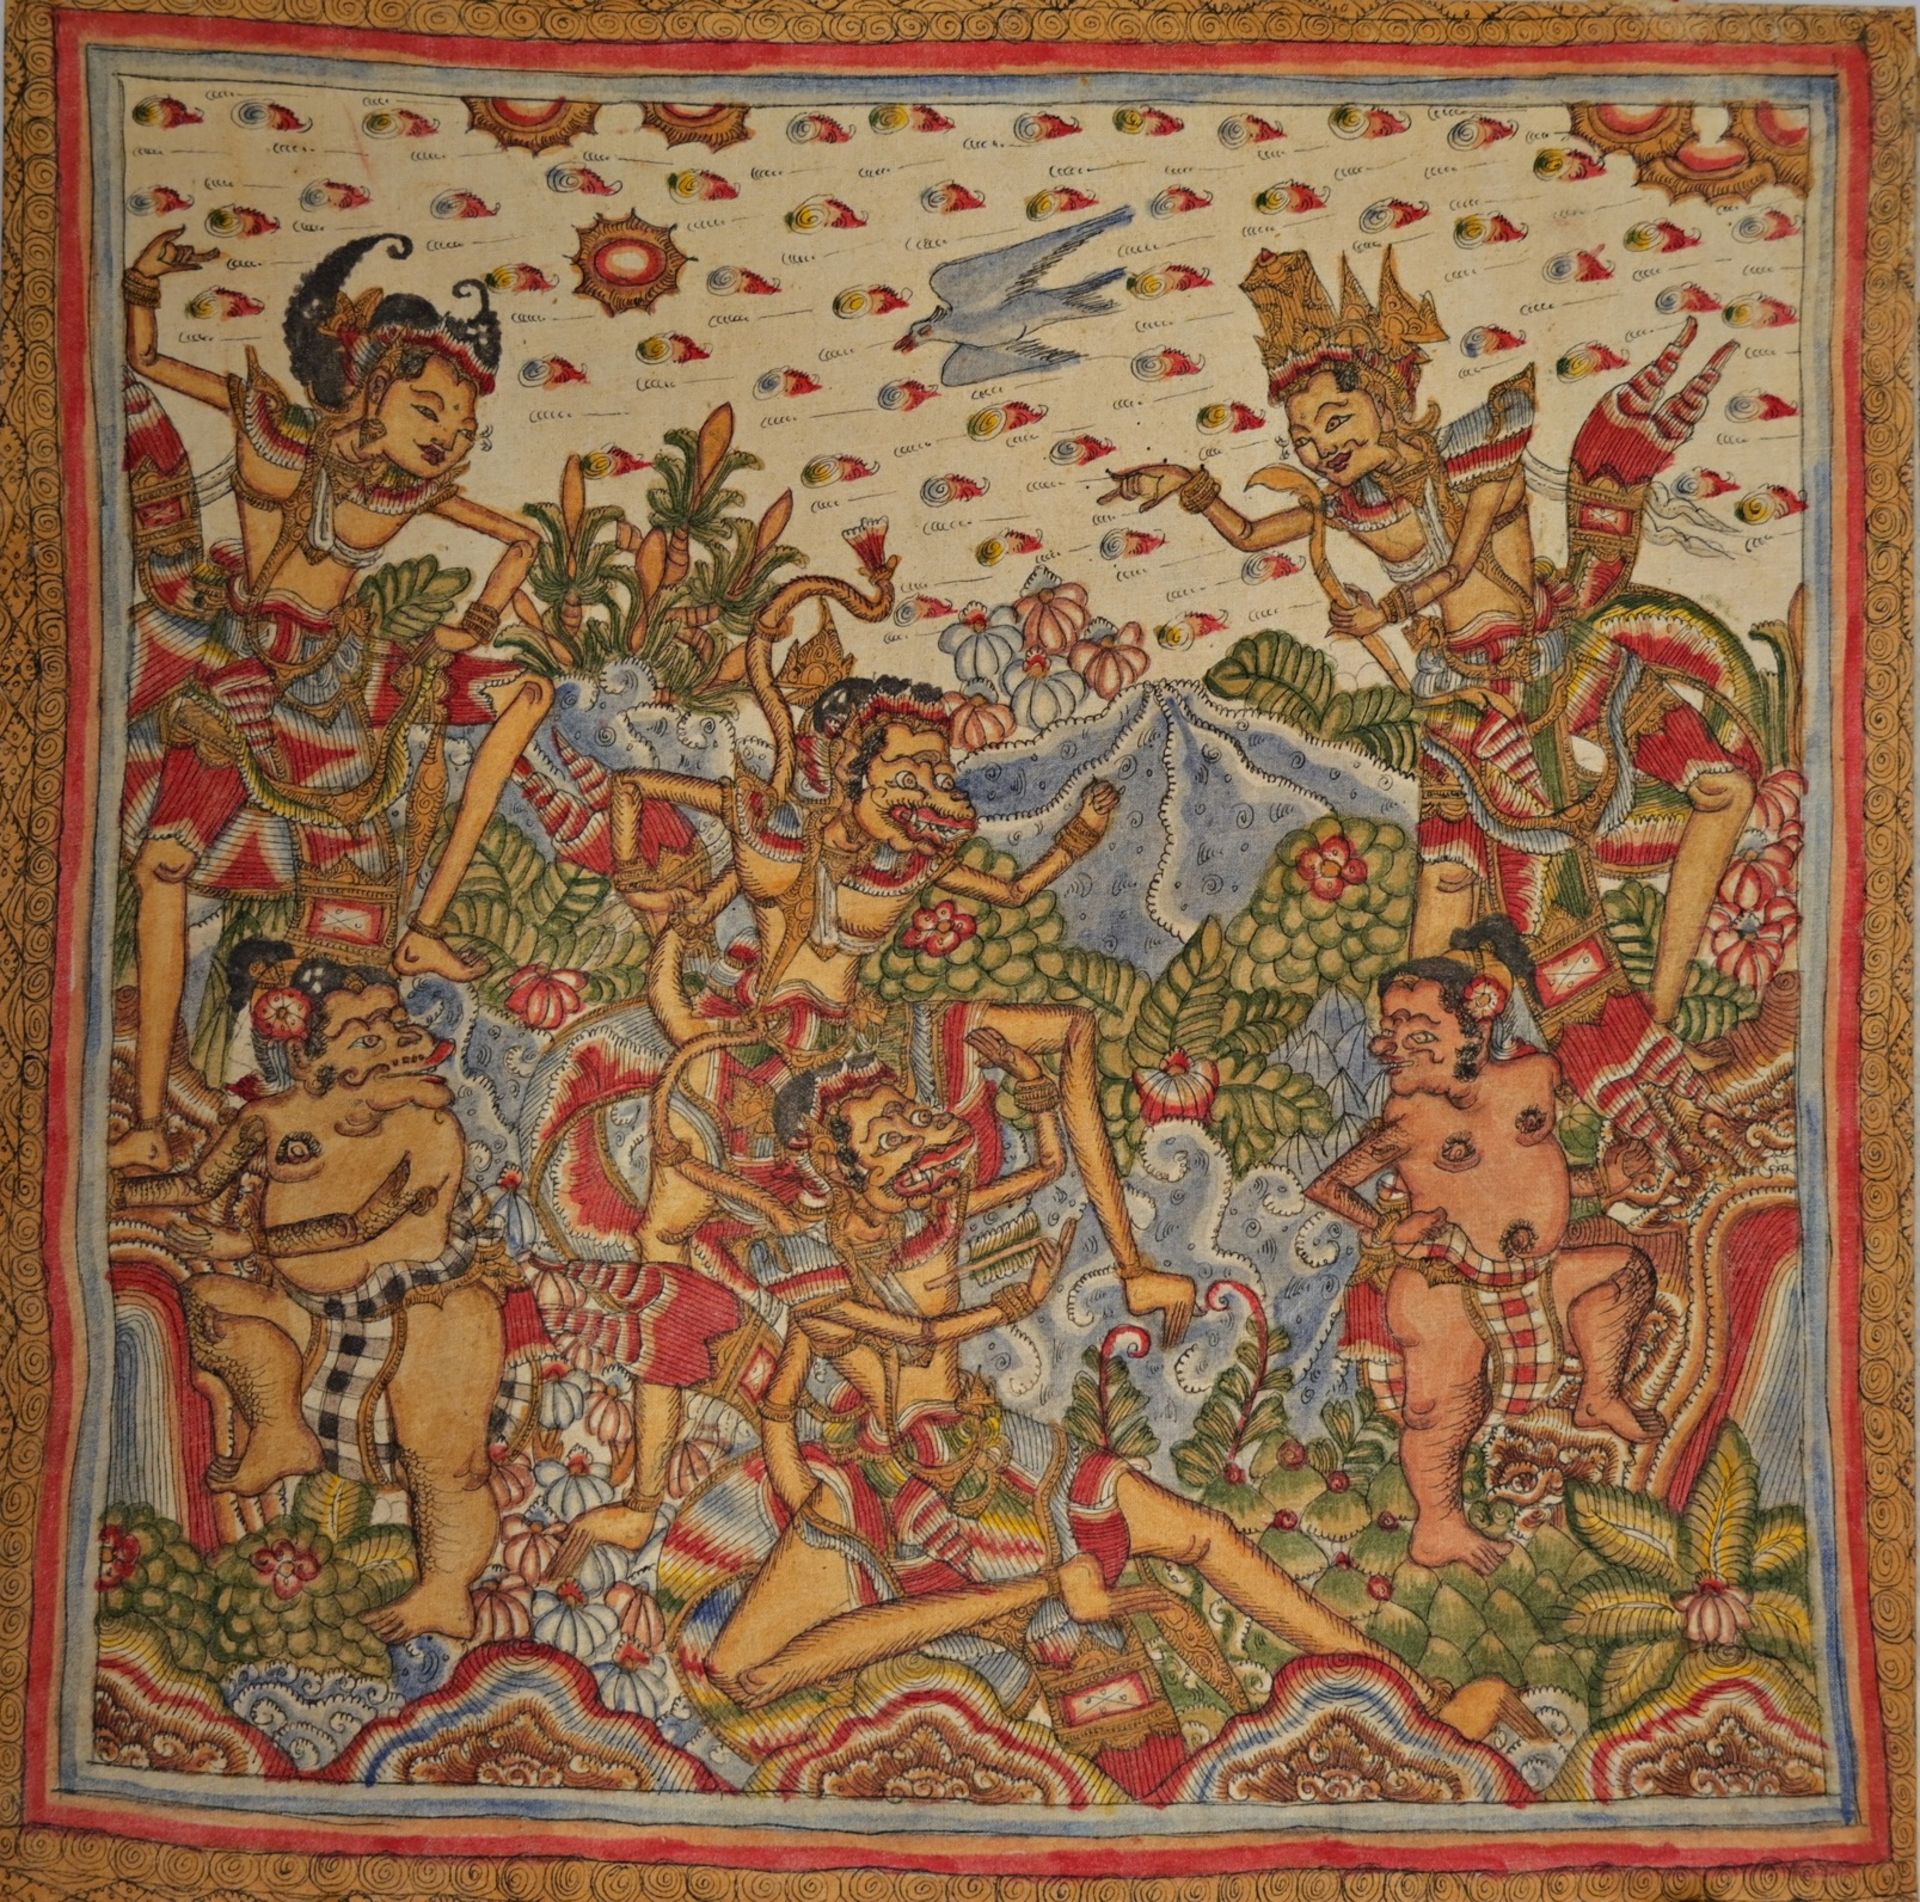 Four (4) traditional Buddhist, Indonesia, painting on fabric bound together, 20th century. - Image 5 of 6